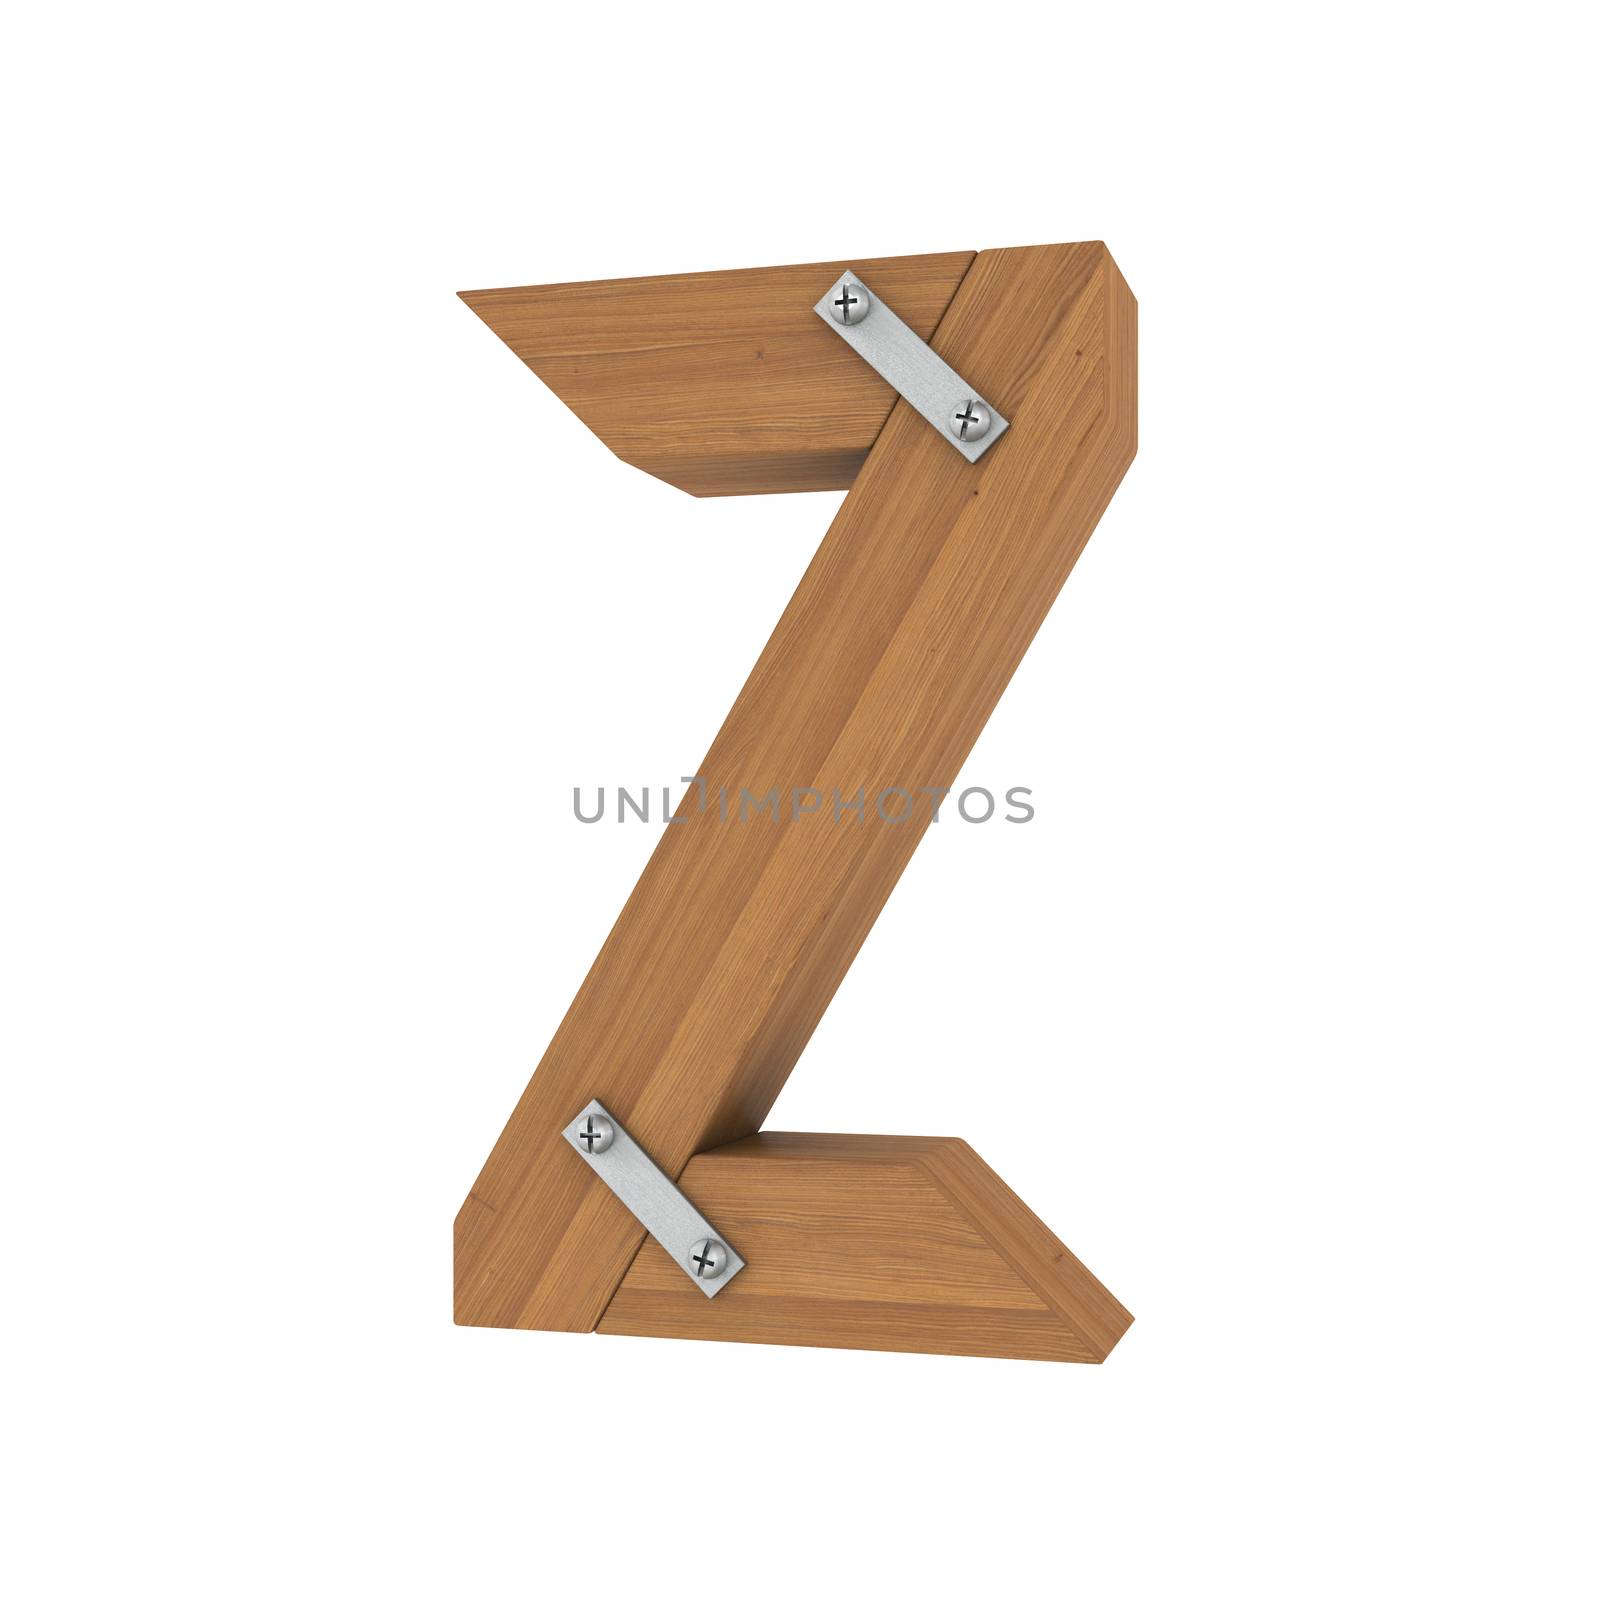 Wooden letter Z. Isolated render on a white background